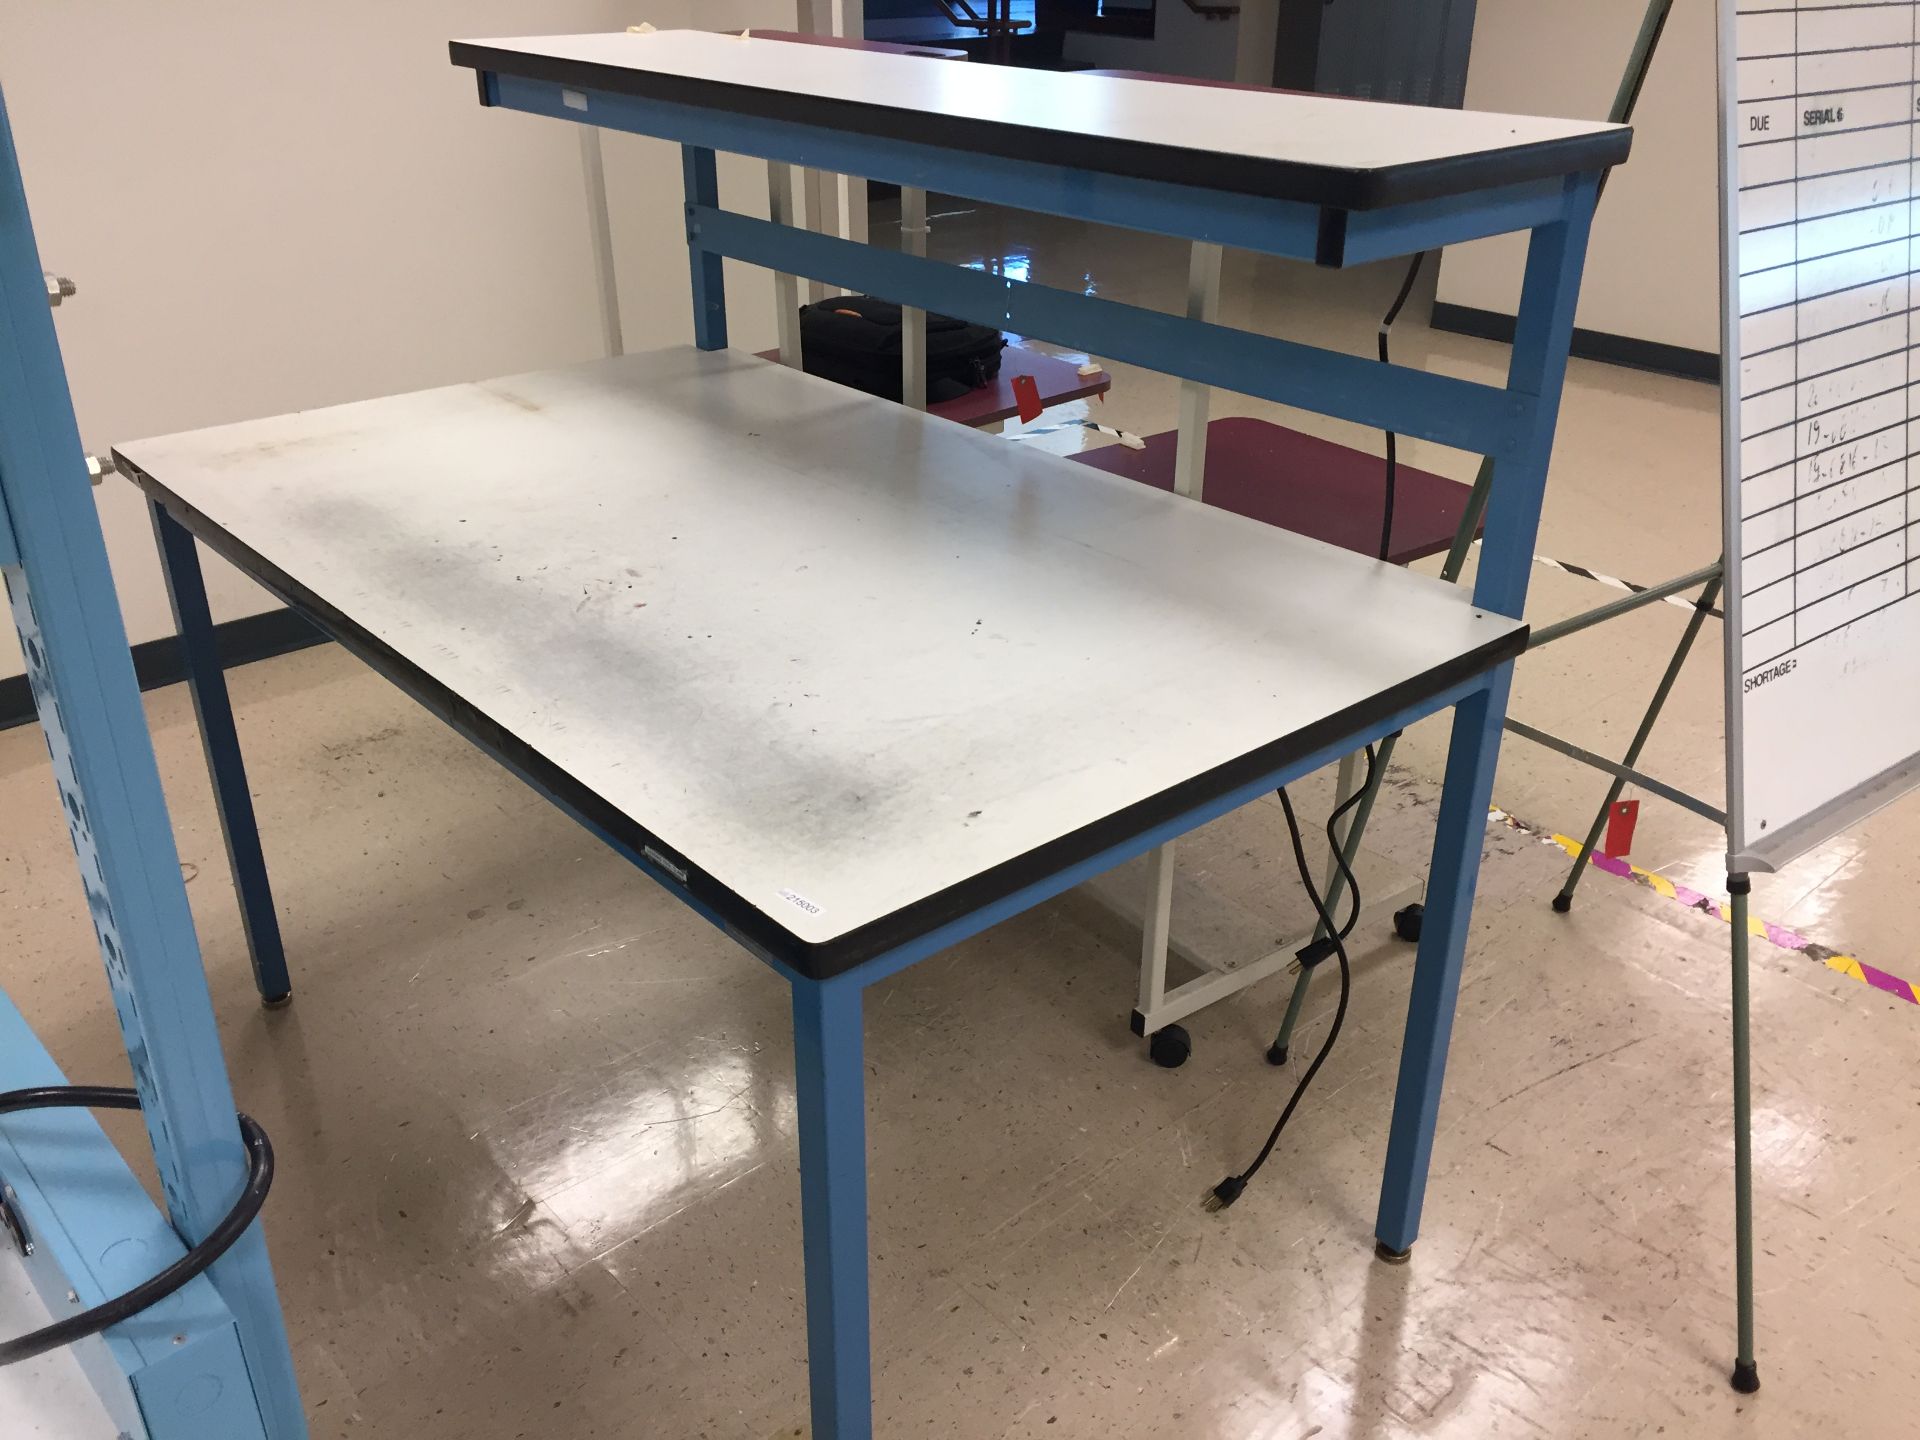 Workplace approx 5' Laminated workstation bench